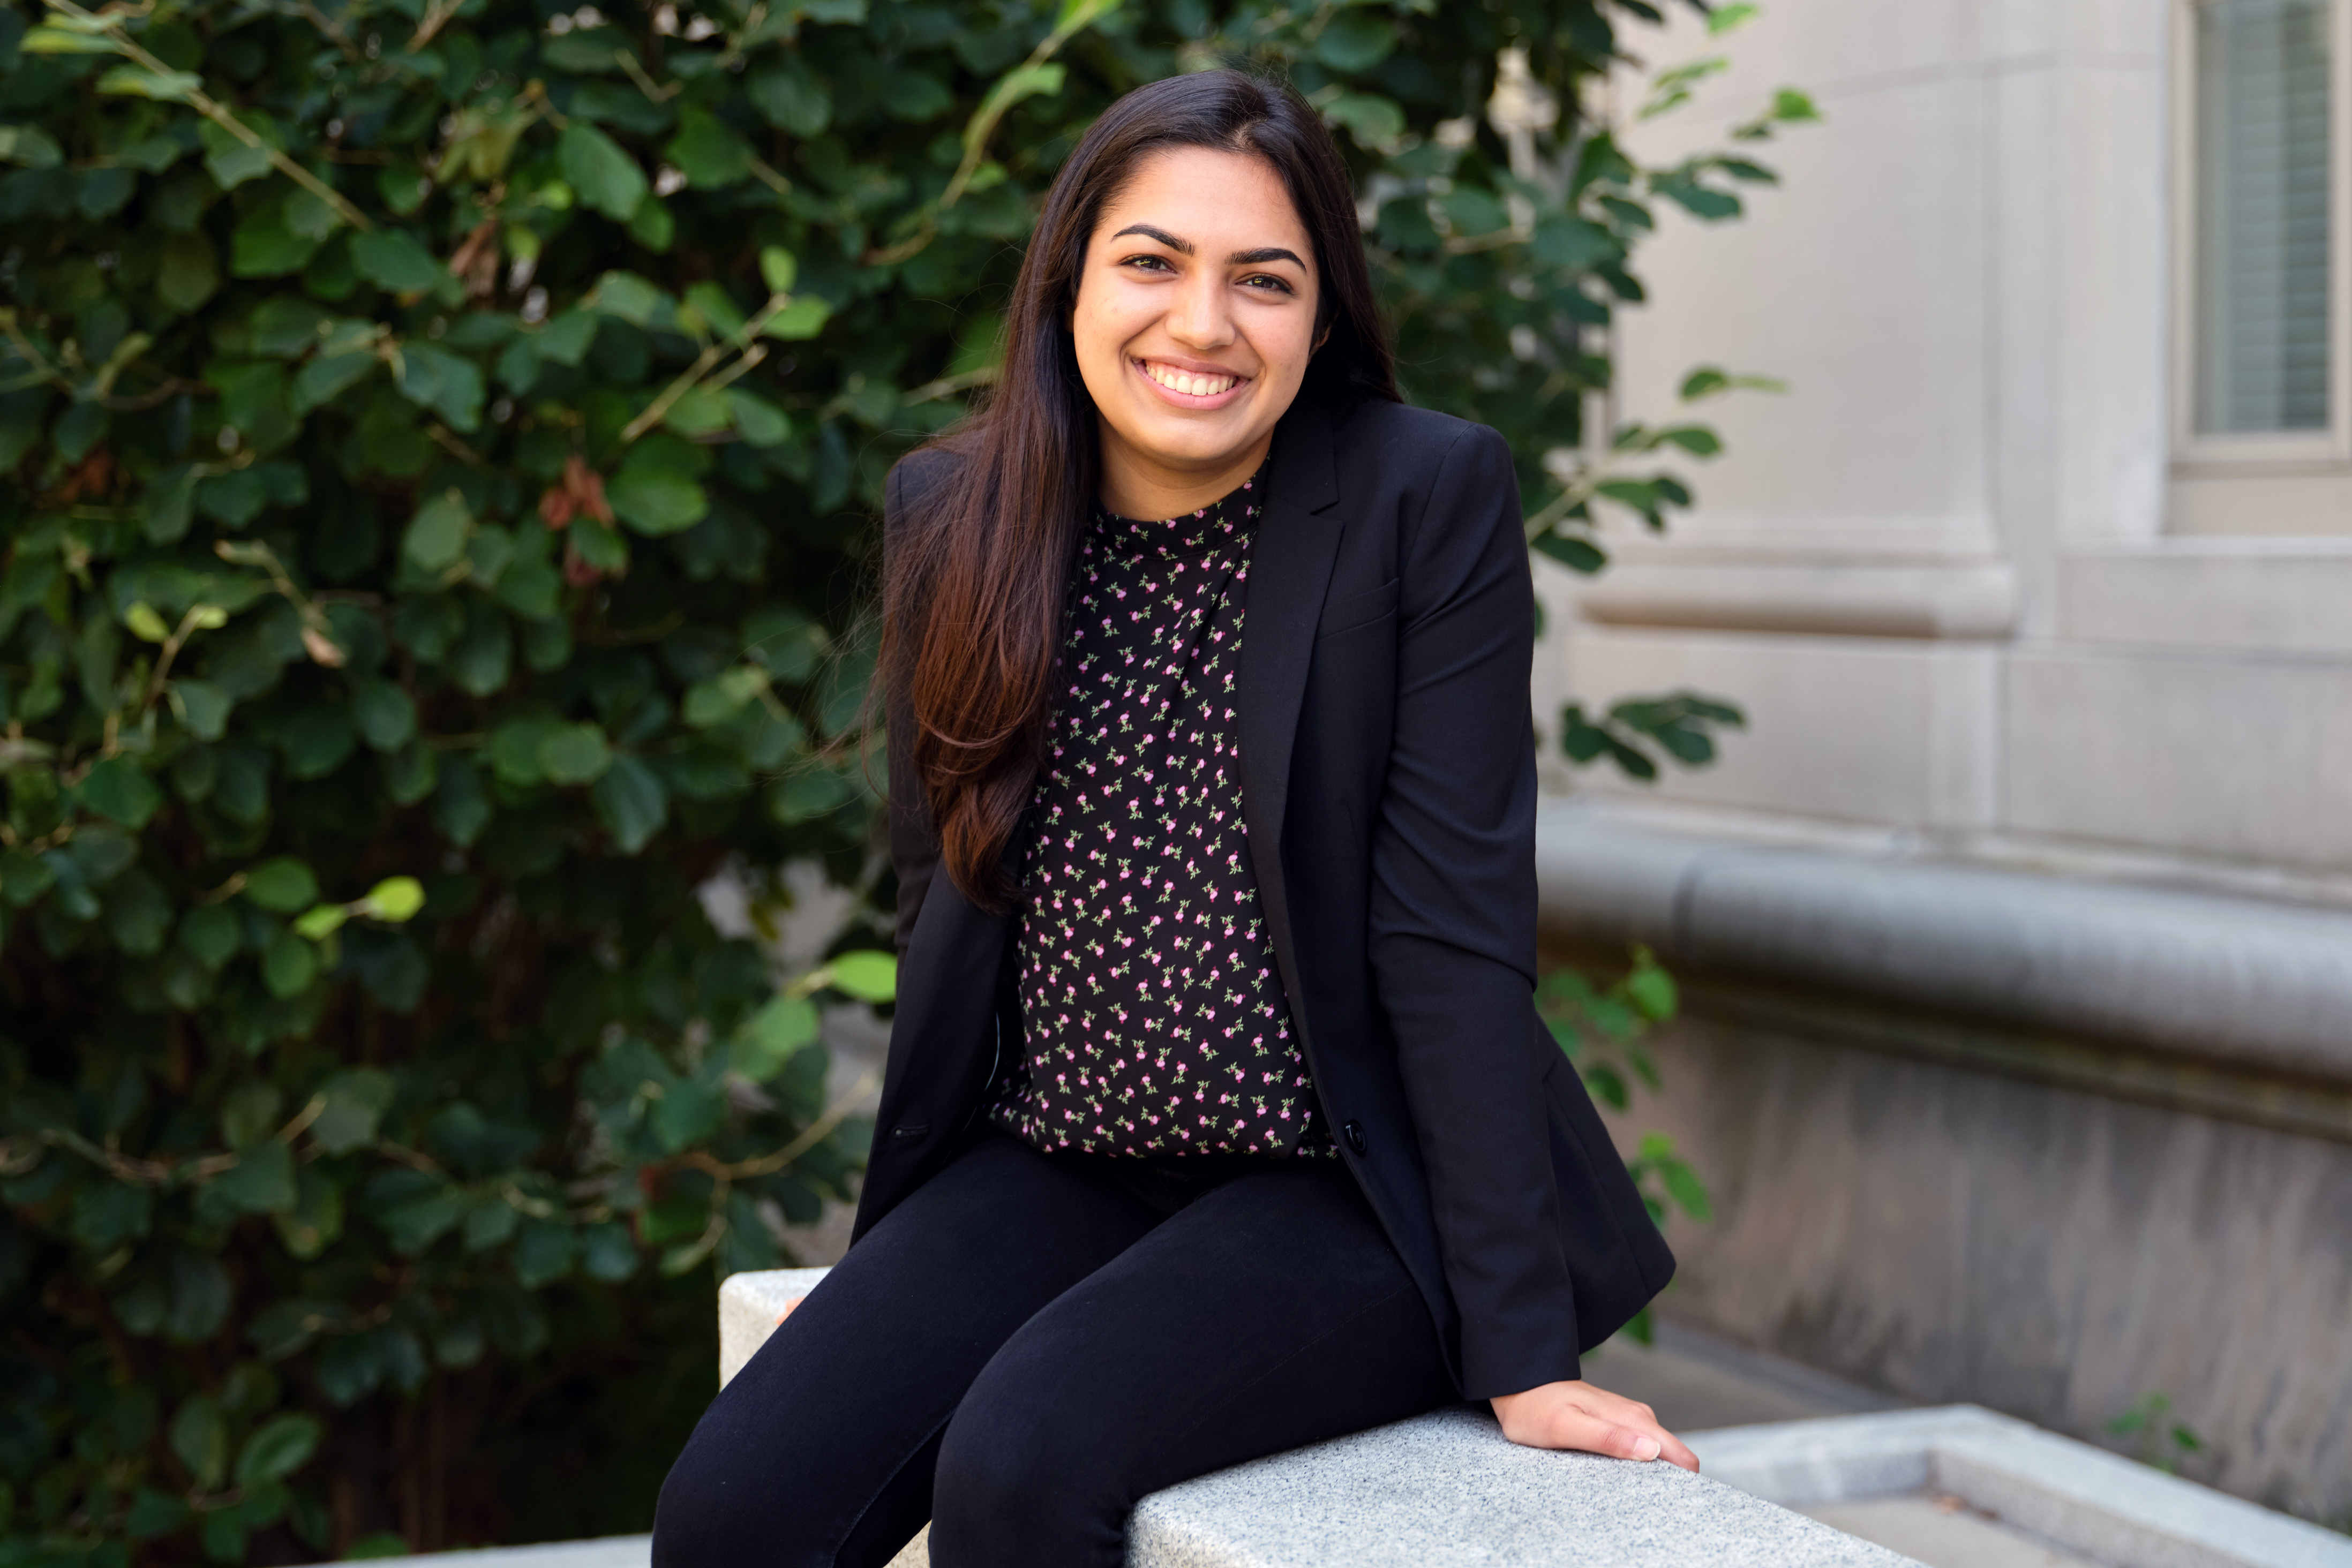 Now a fourth-year PhD student in the Department of Materials Science and Engineering, Avni Singhal devotes herself to both developing sustainable materials and improving the graduate experience in her department.